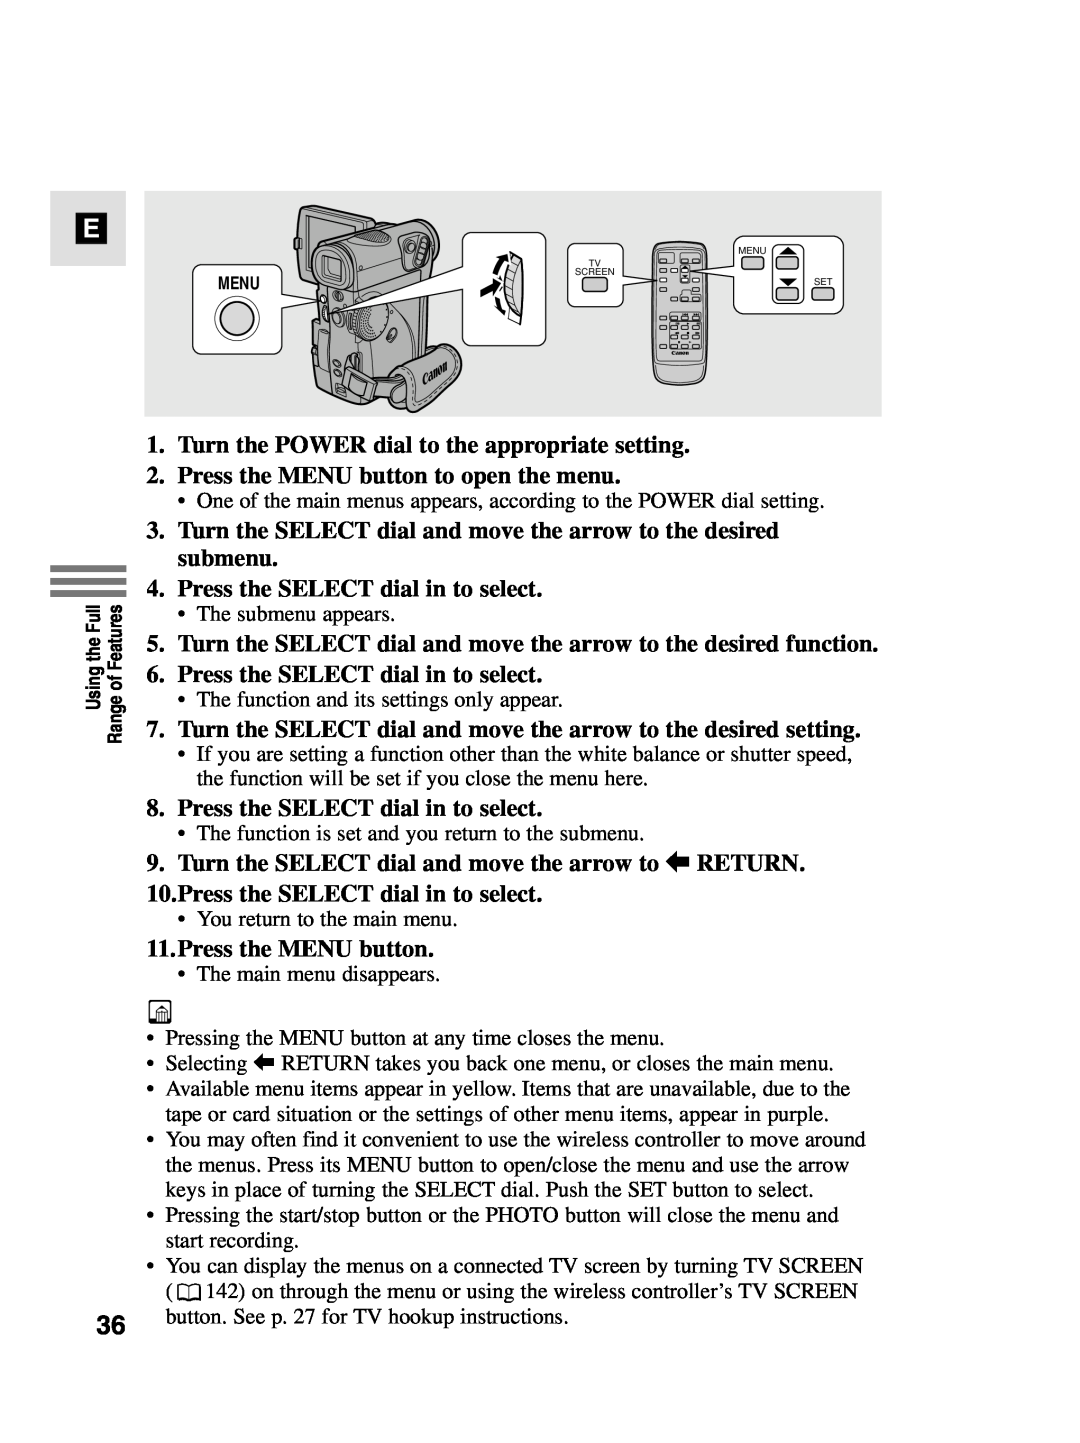 Canon MV4i MC instruction manual Turn the POWER dial to the appropriate setting, Press the MENU button to open the menu 